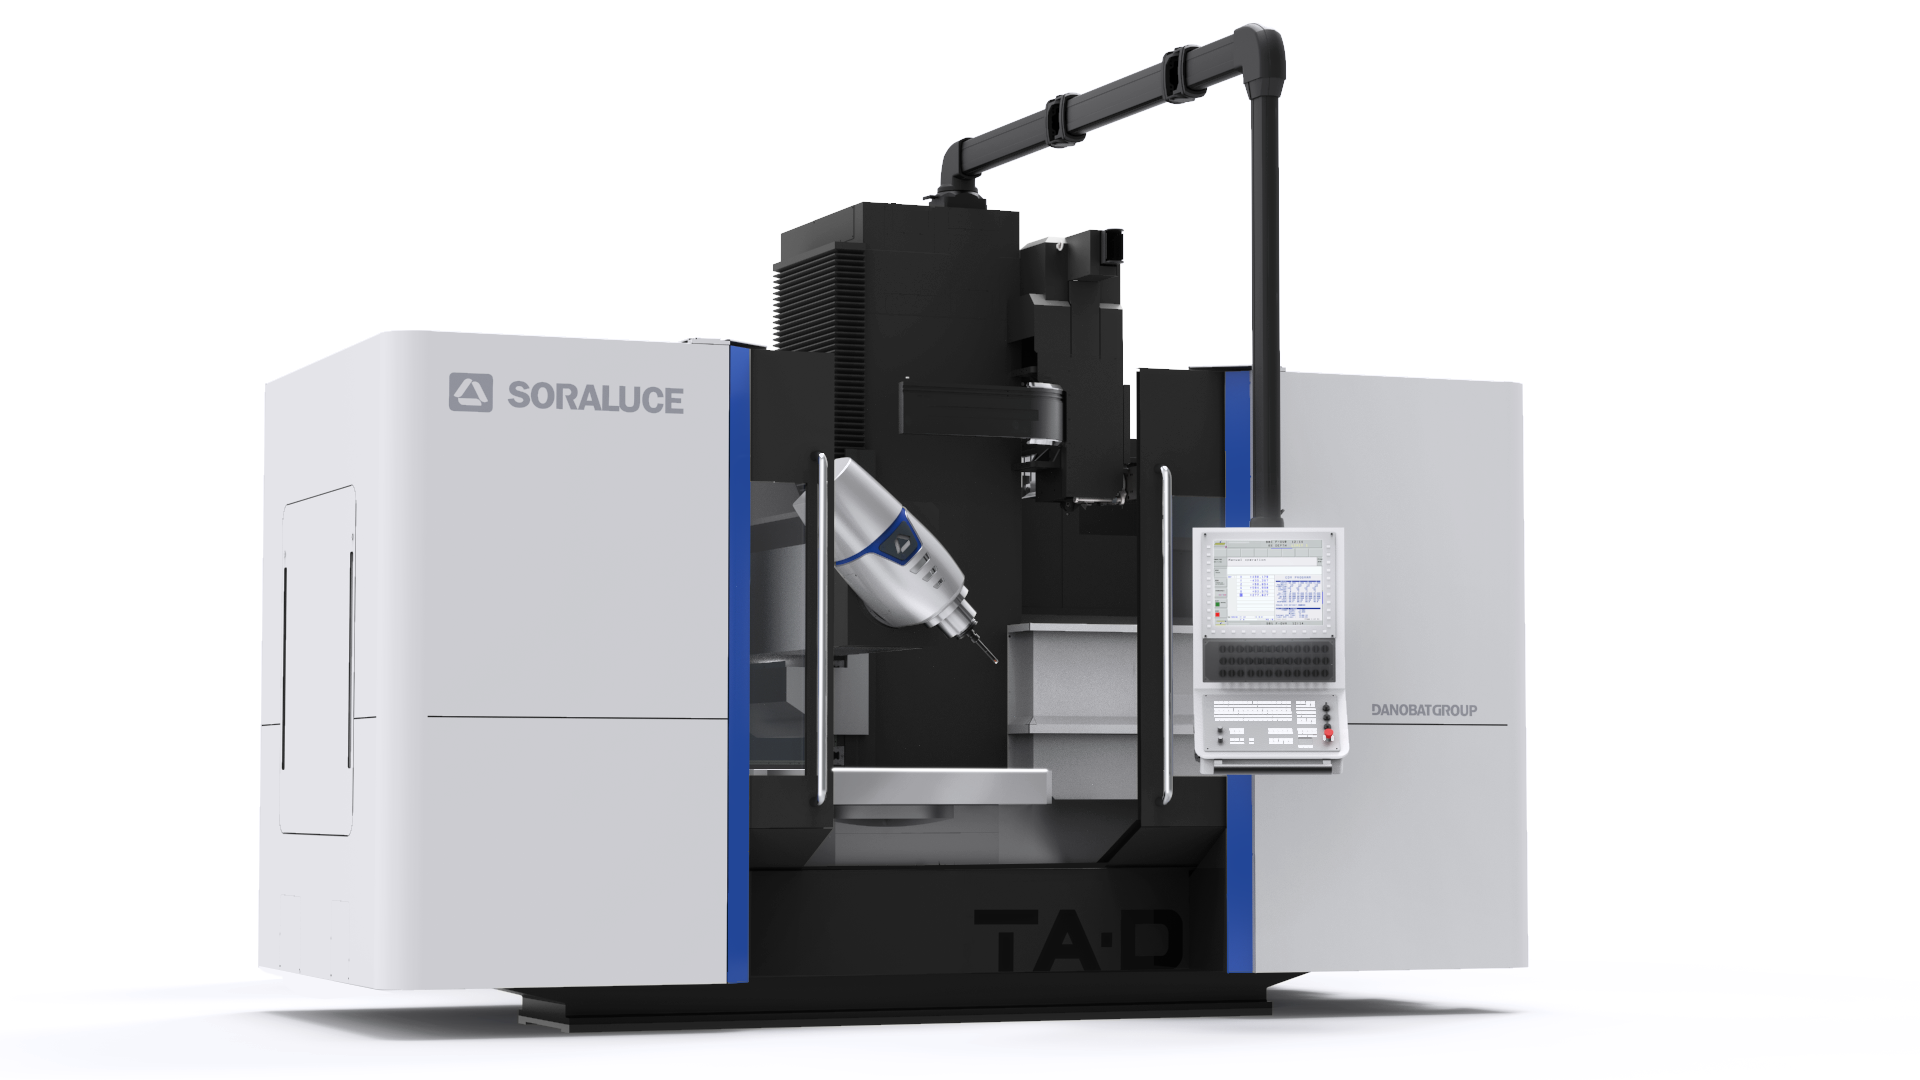 SORALUCE to showcase the SORALUCE TA-D 20 5-axis machining centre at the la EMAF 2018